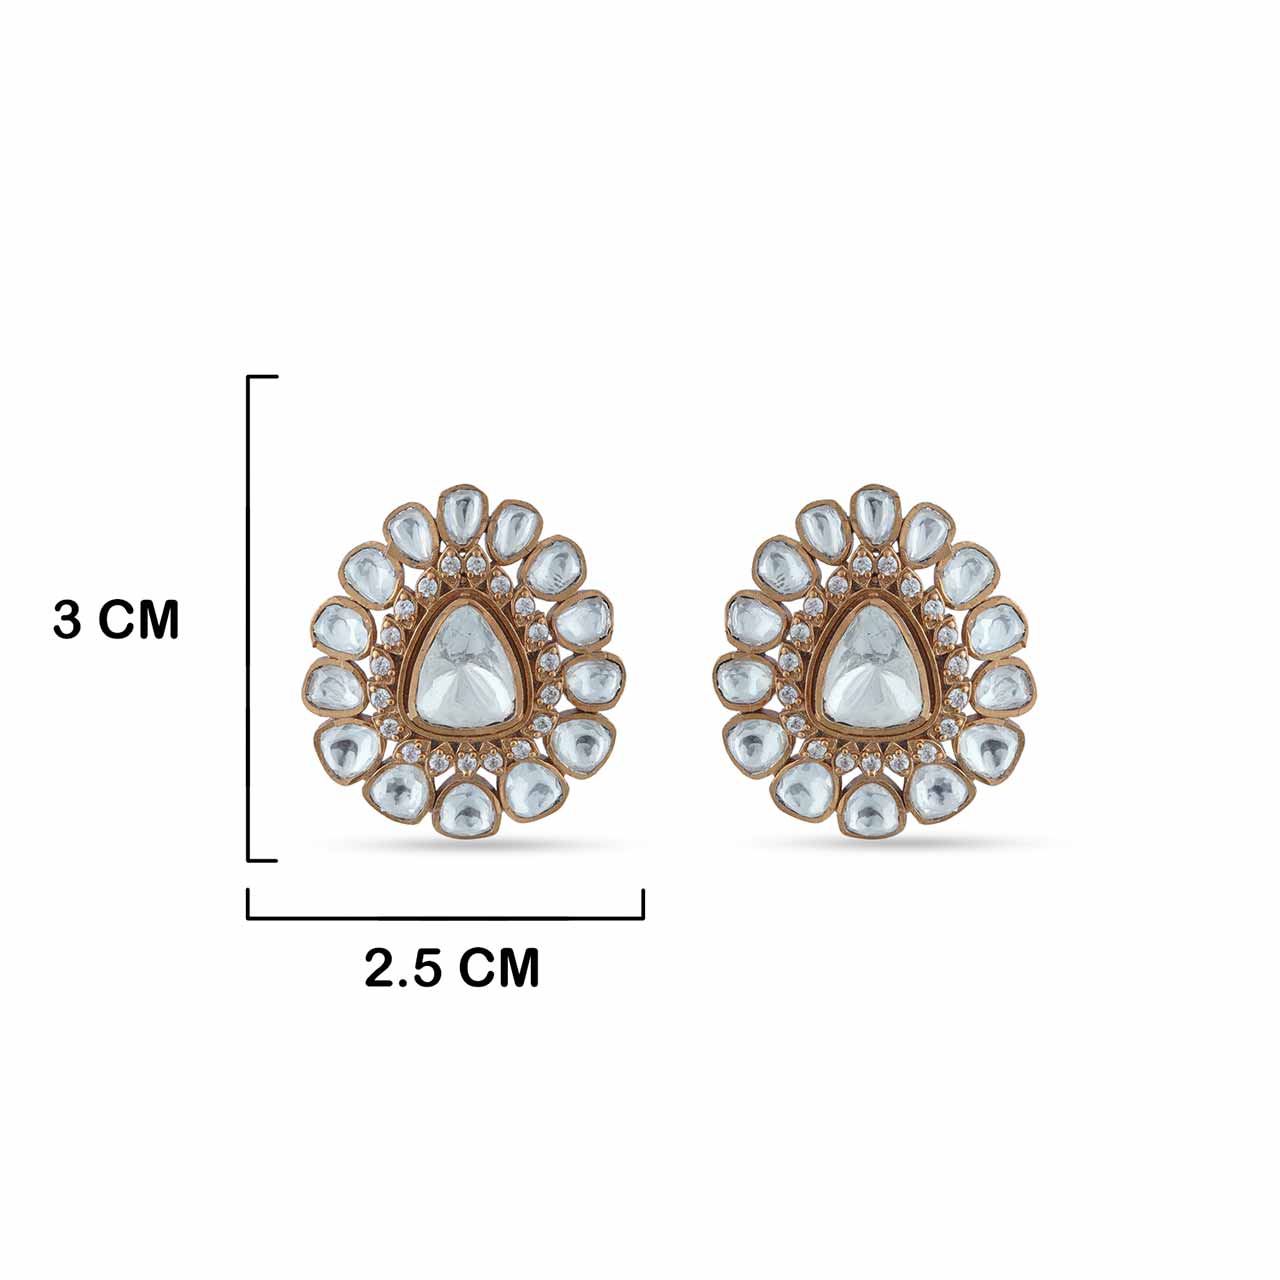 Silver and Gold Polki Stud Earrings with Measurements